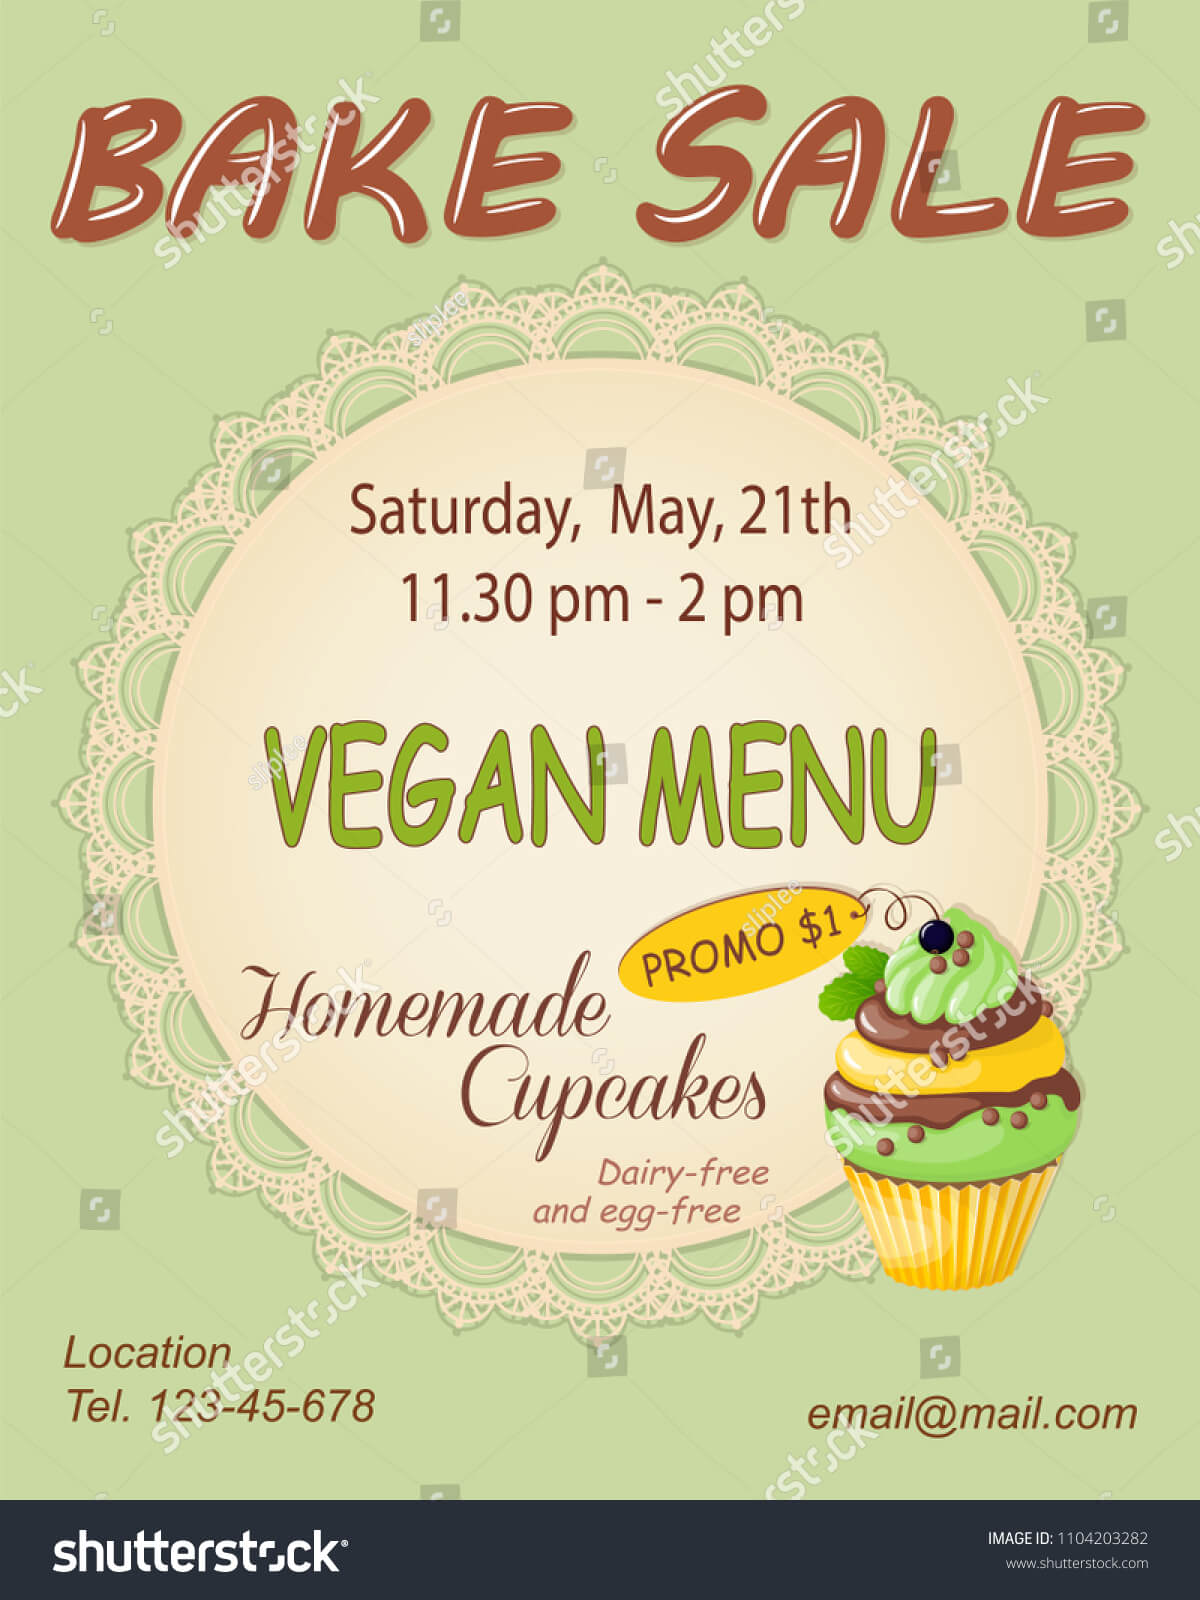 038 Stock Vector Colorful Flyer Template For Vegan Bake Sale Inside Bake Sale Flyer Template Free